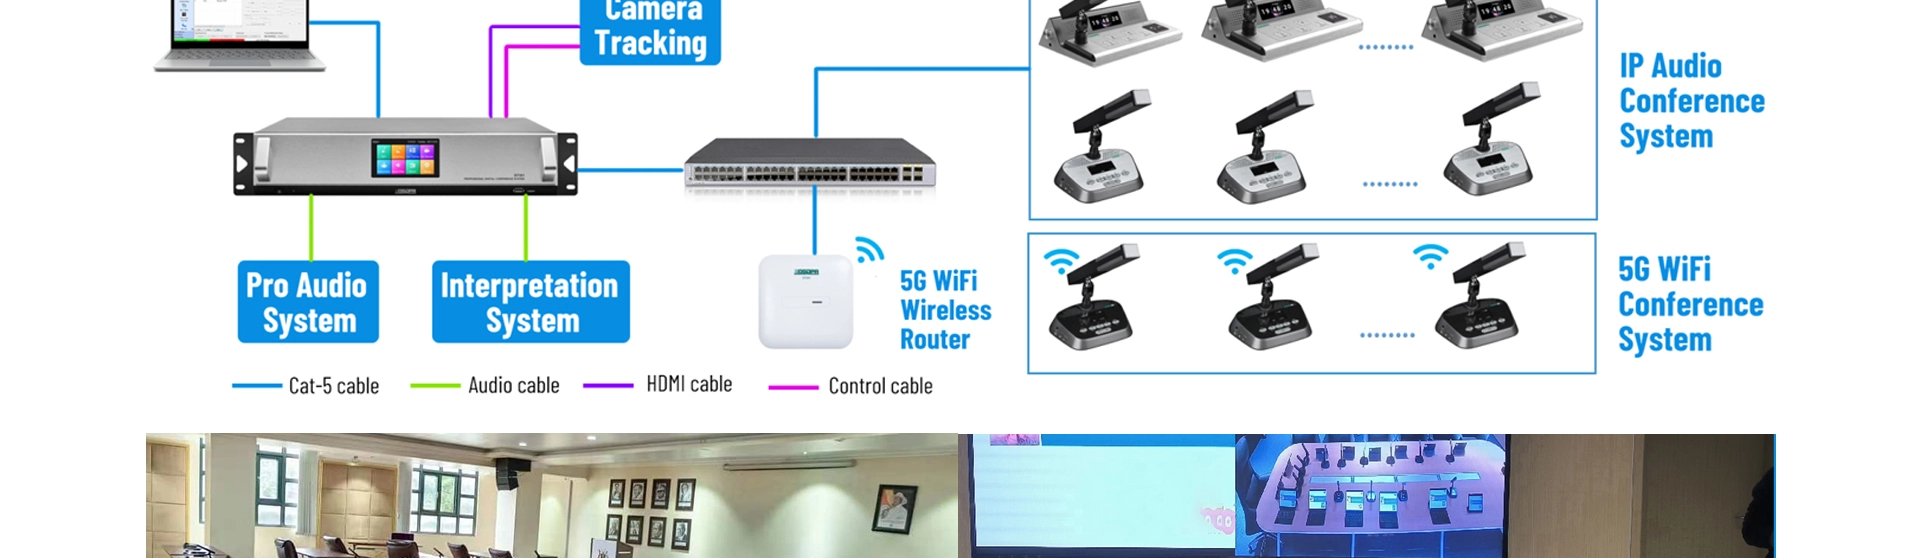 Wireless Conference System 5G WiFi Wireless Discussion Chairman Unit